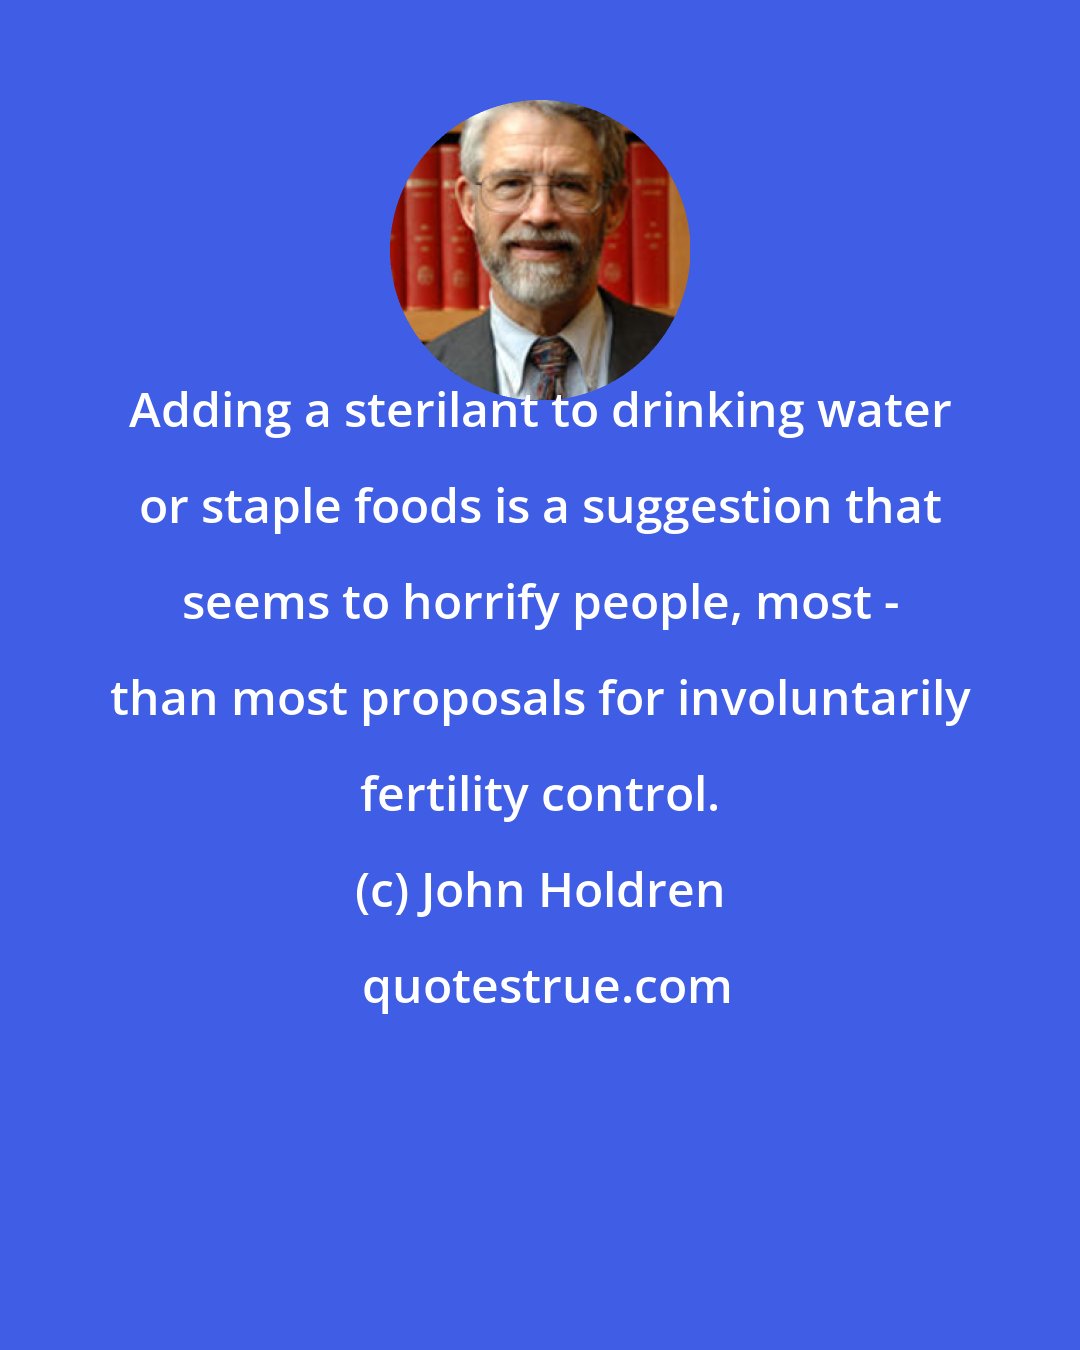 John Holdren: Adding a sterilant to drinking water or staple foods is a suggestion that seems to horrify people, most - than most proposals for involuntarily fertility control.